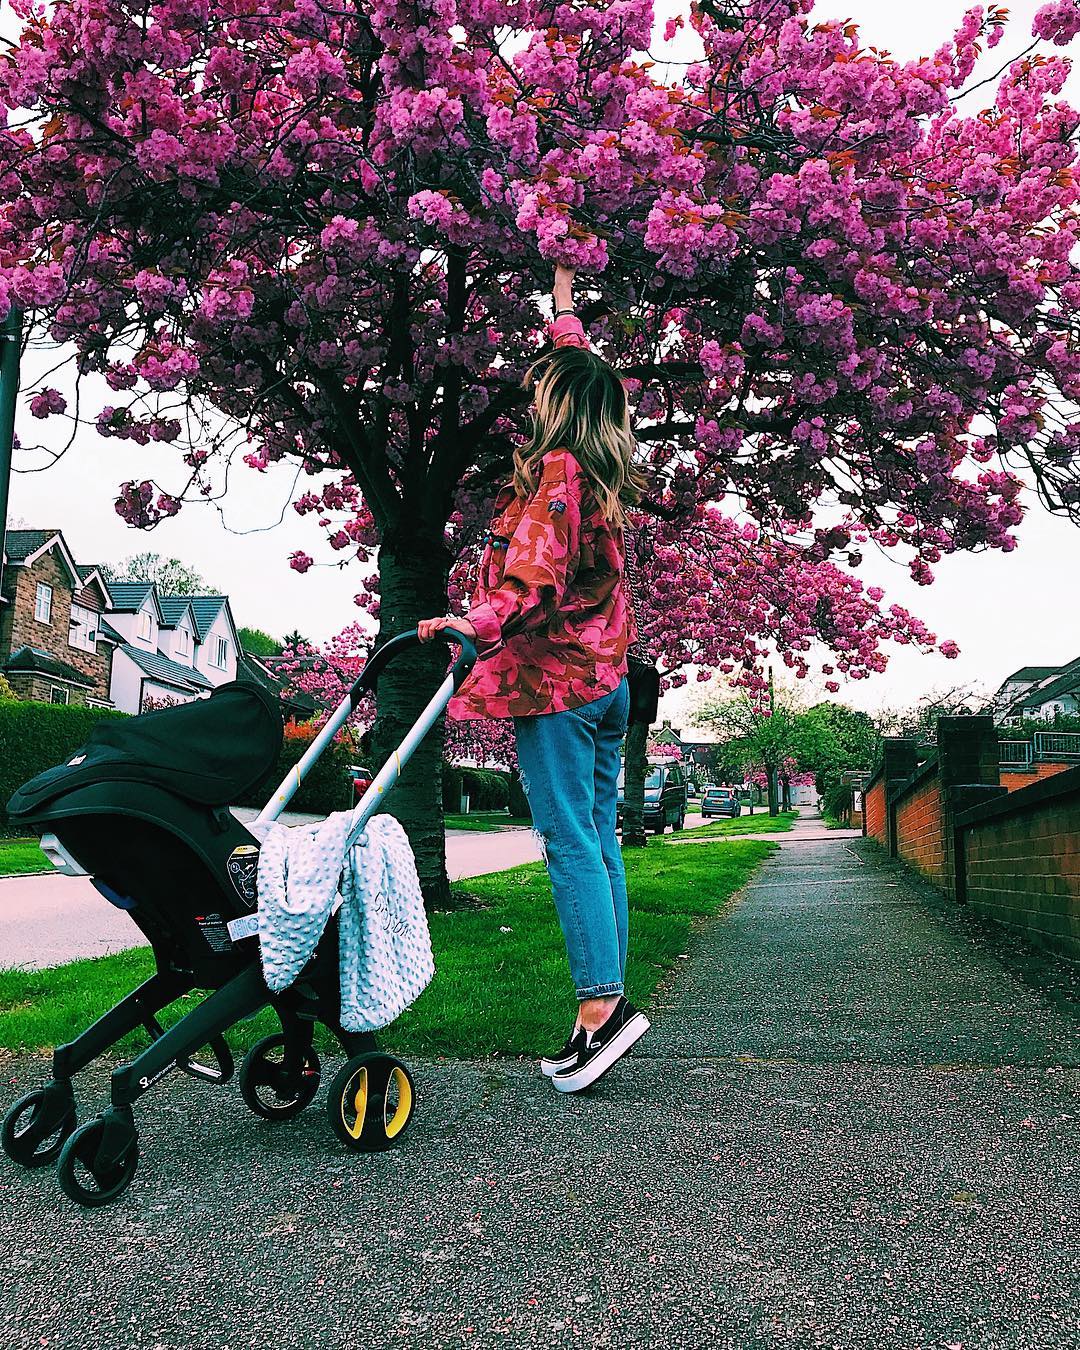 Woman picking pink flowers from a tree. Photo by Instagram user @astonmerrygold